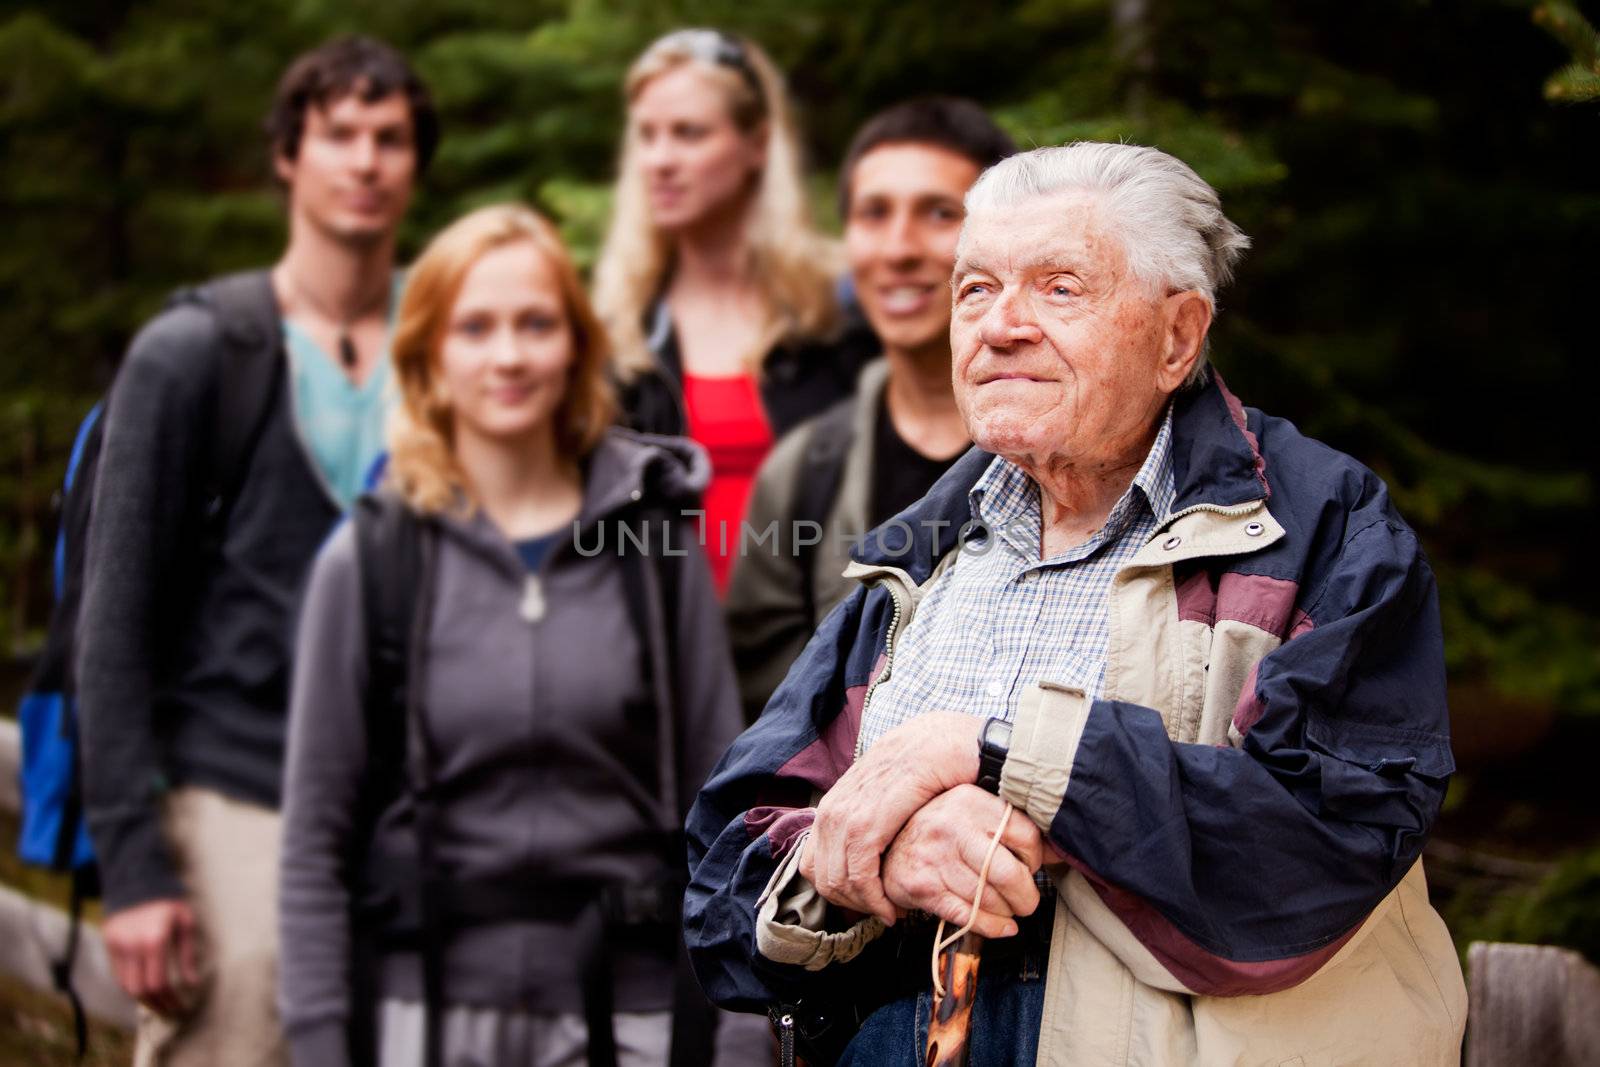 An elderly man giving a tour for a young group of people